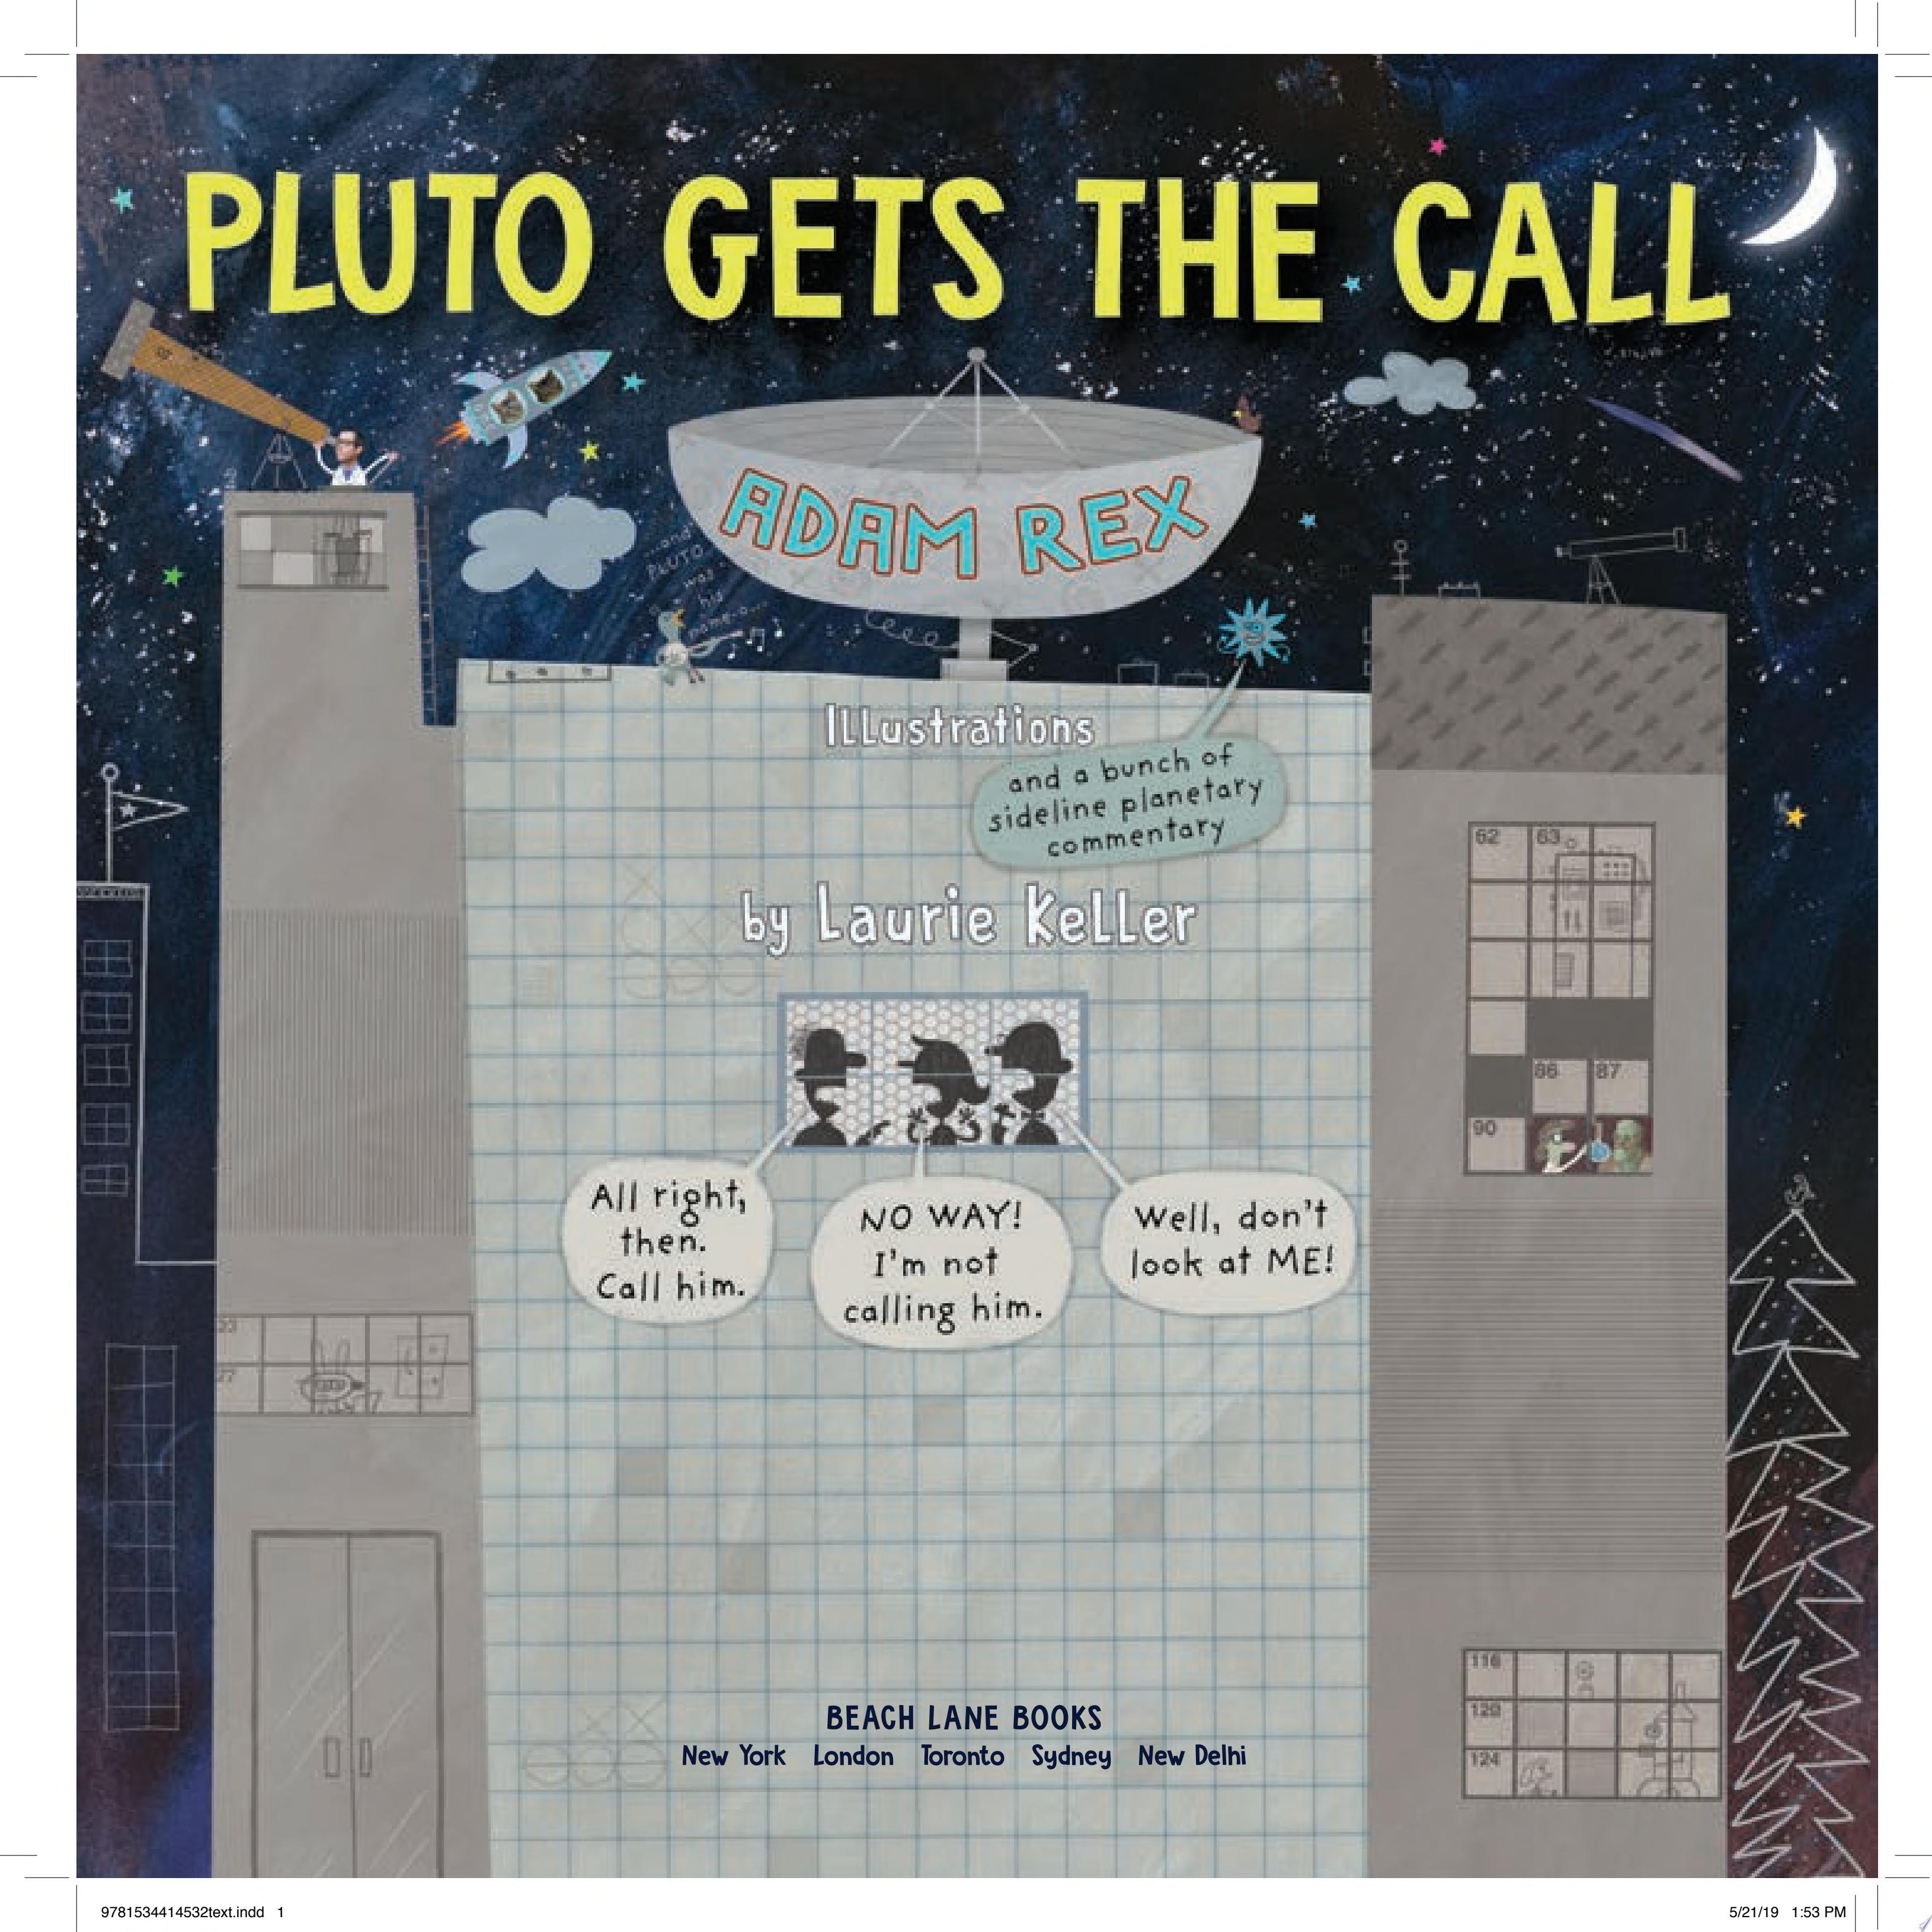 Image for "Pluto Gets the Call"